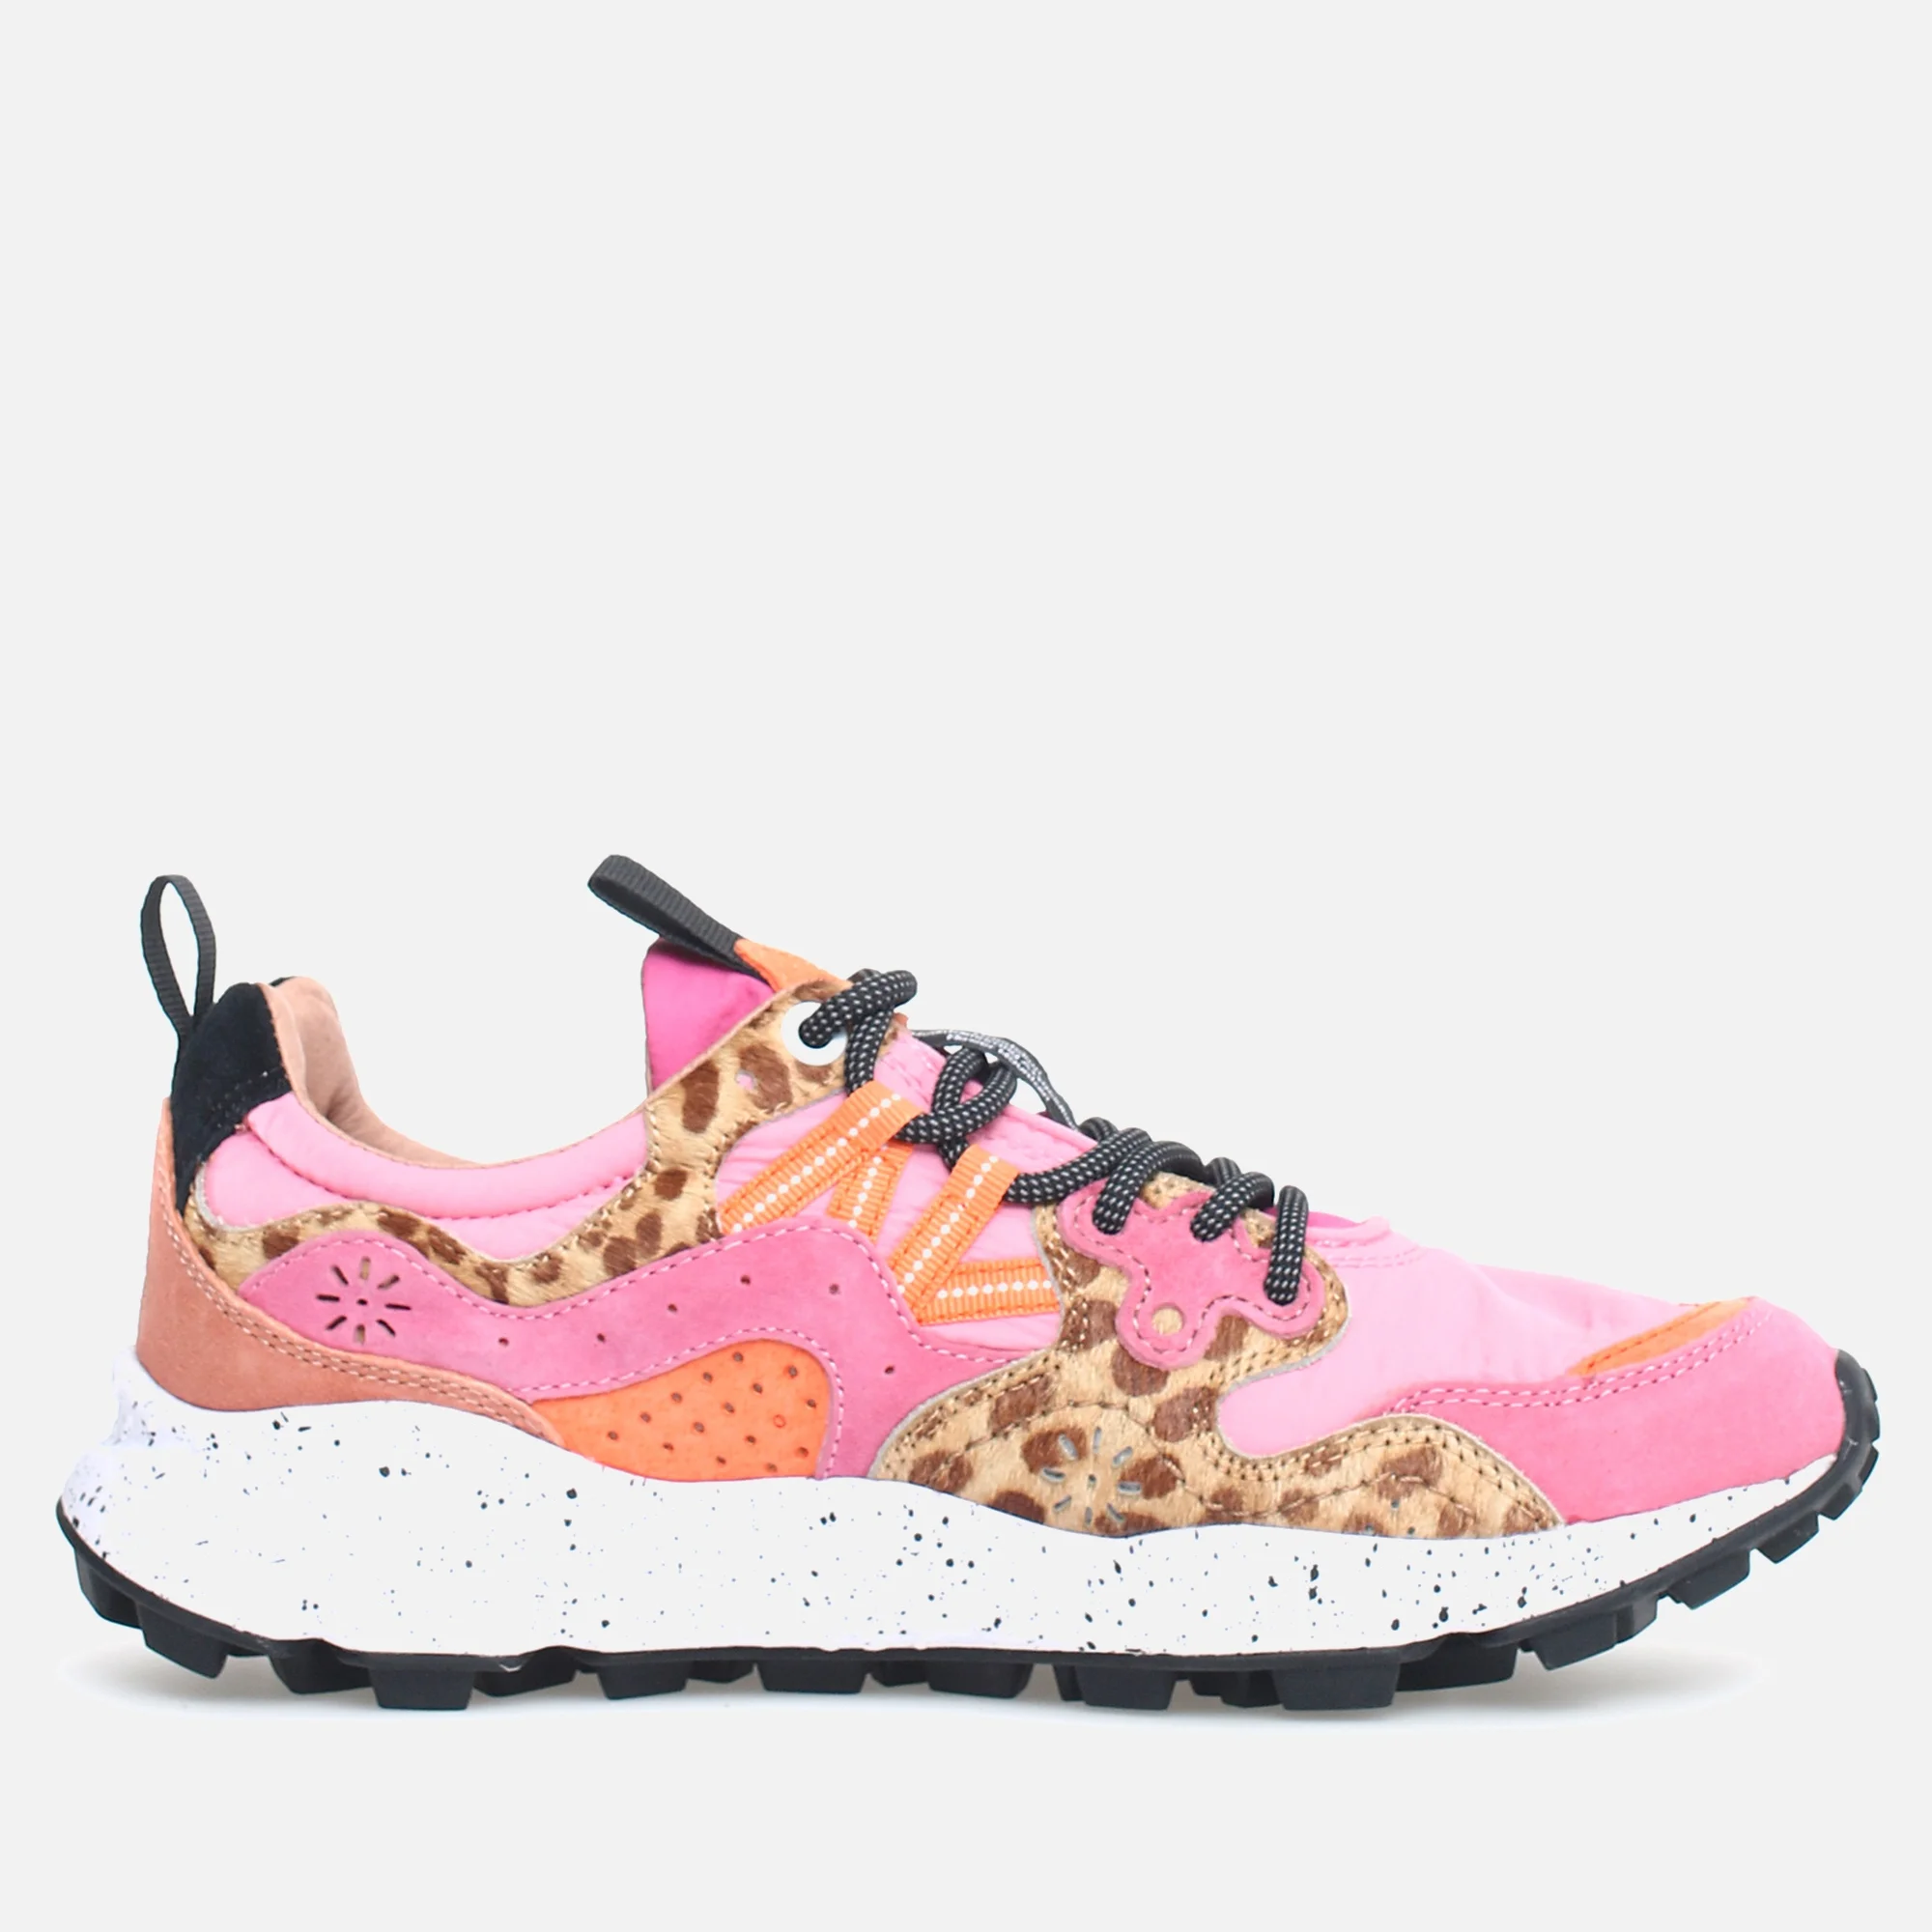 Flower Mountain Women's Yamano 3 Suede, Leather and Shell Trainers Image 1